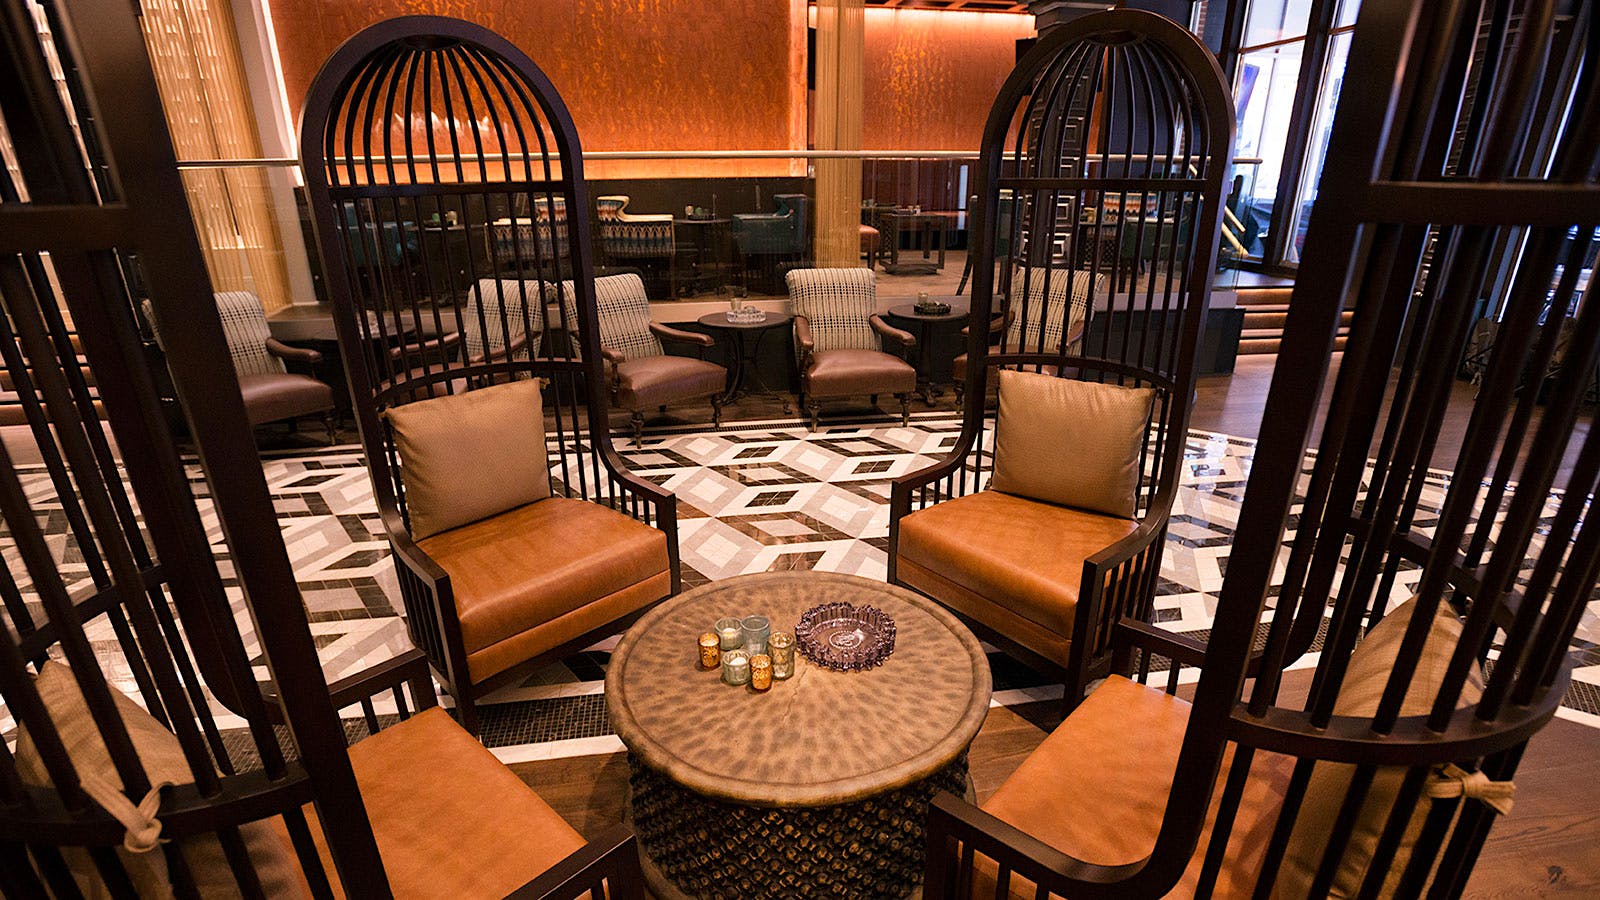 Rocky Patel plans on keeping Burn upscale. You can see it in the details, from the smart furniture down to the tiled floors.